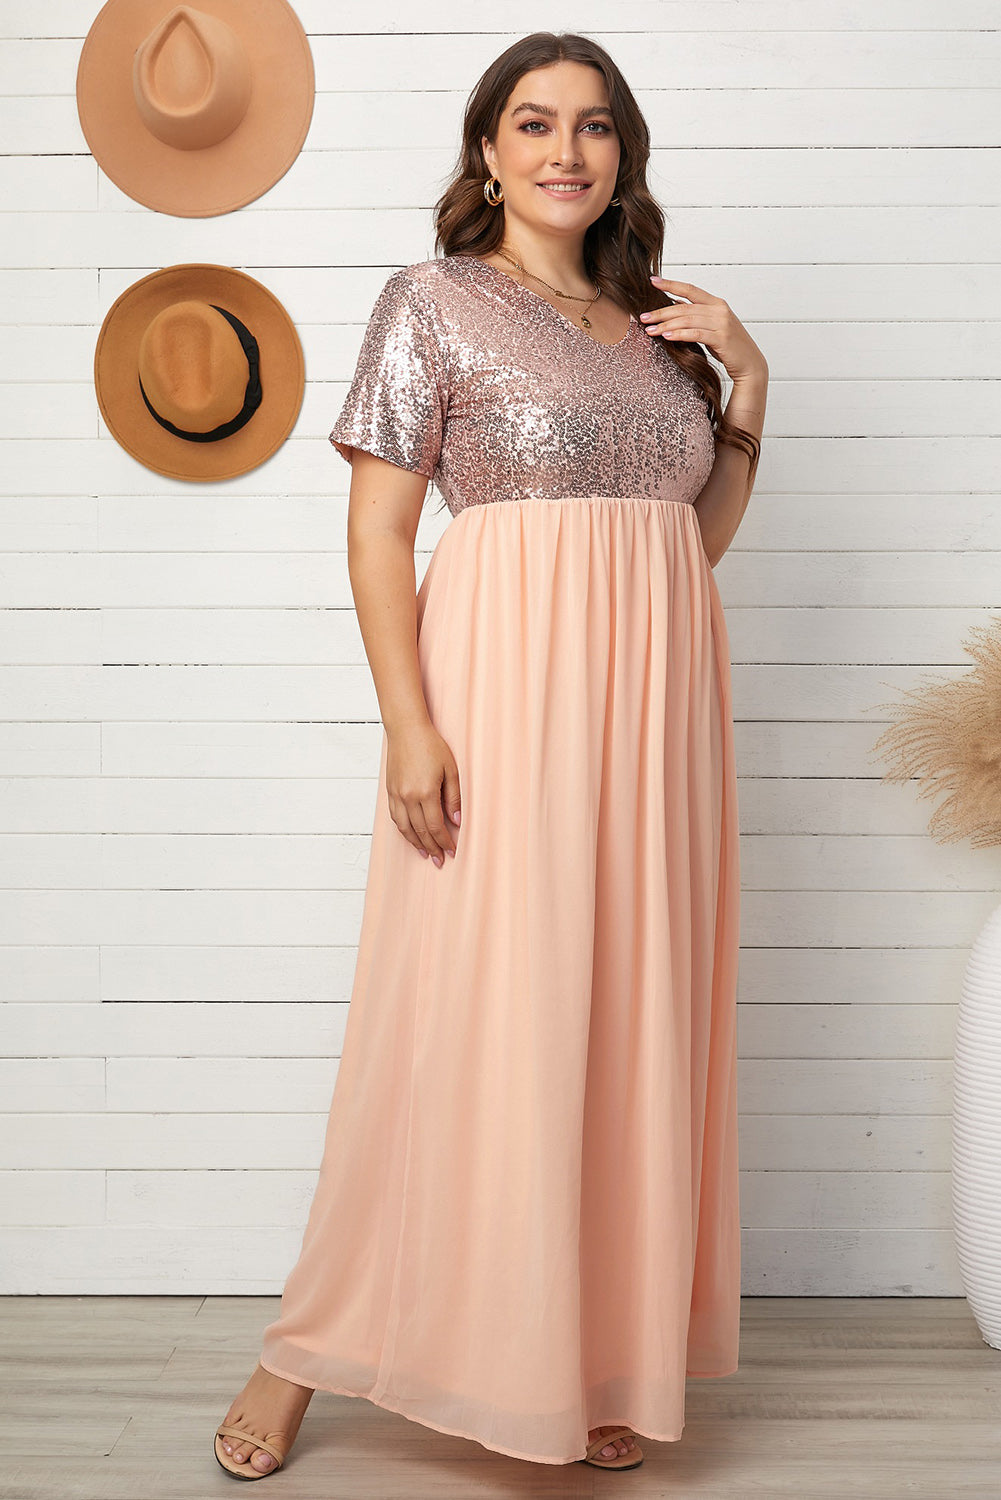 Sequined Spliced Maxi Dress